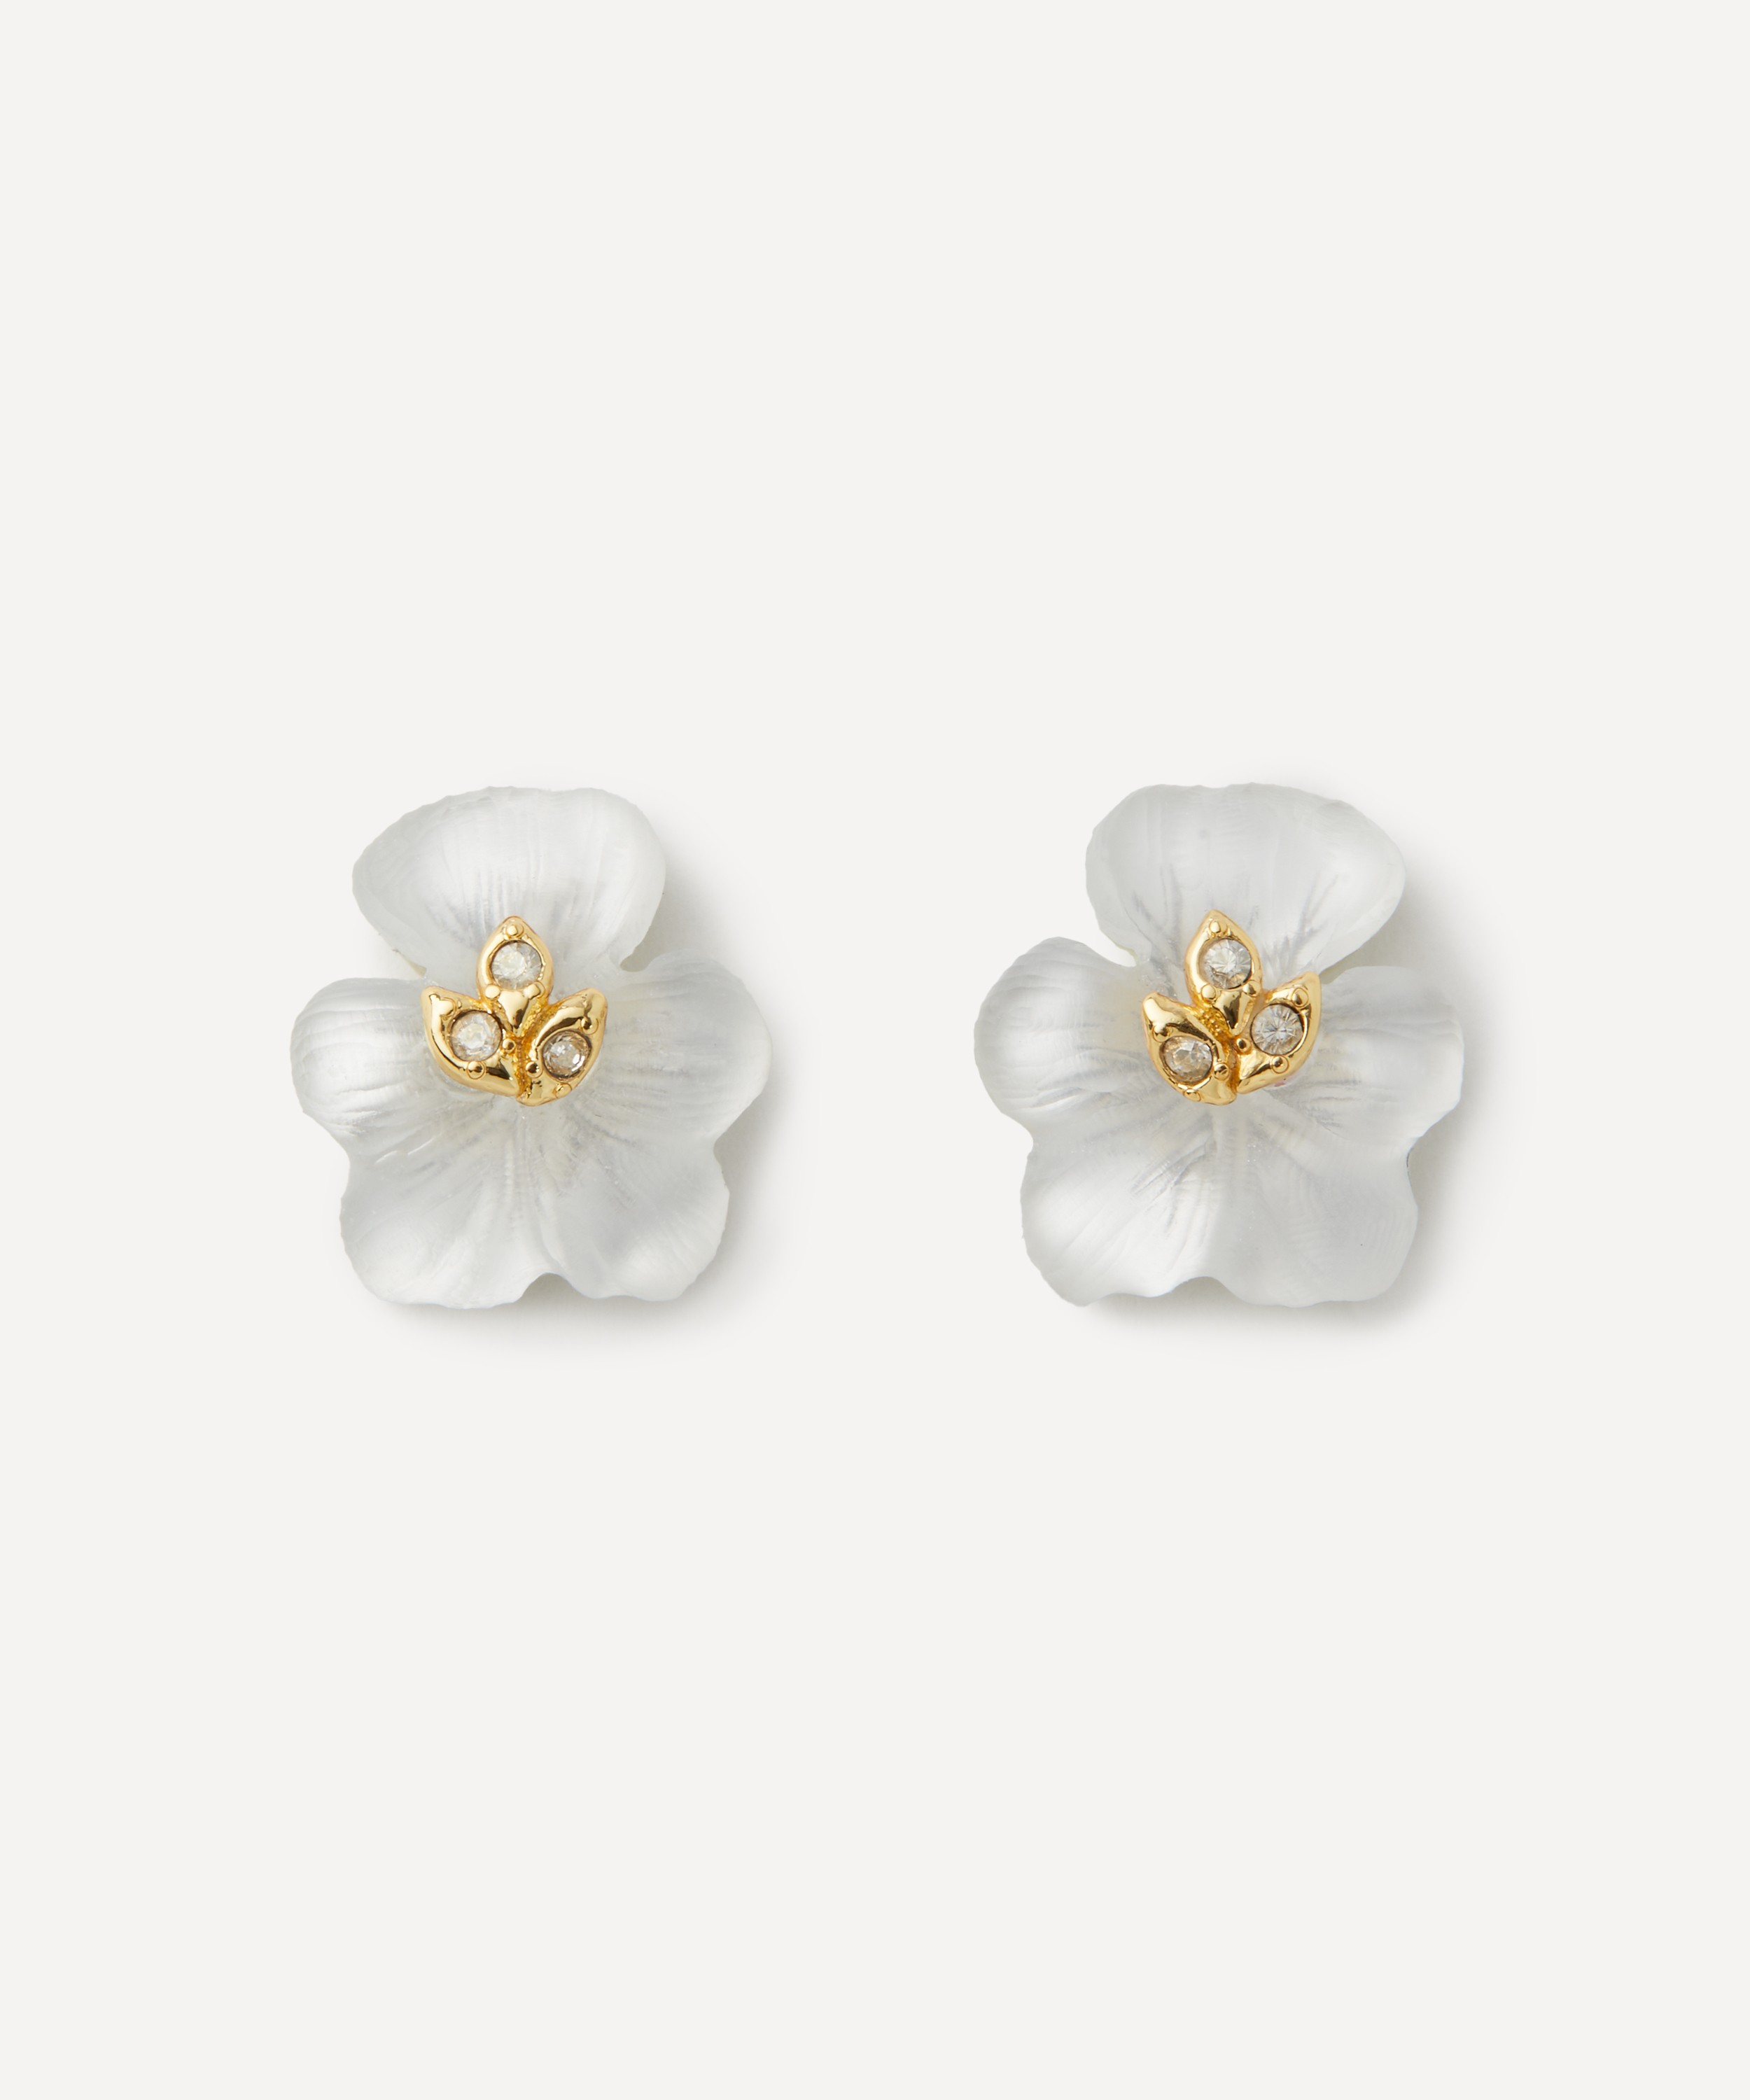 Alexis Bittar - 14ct Gold-Plated Pansy Lucite Petite Stud Earrings